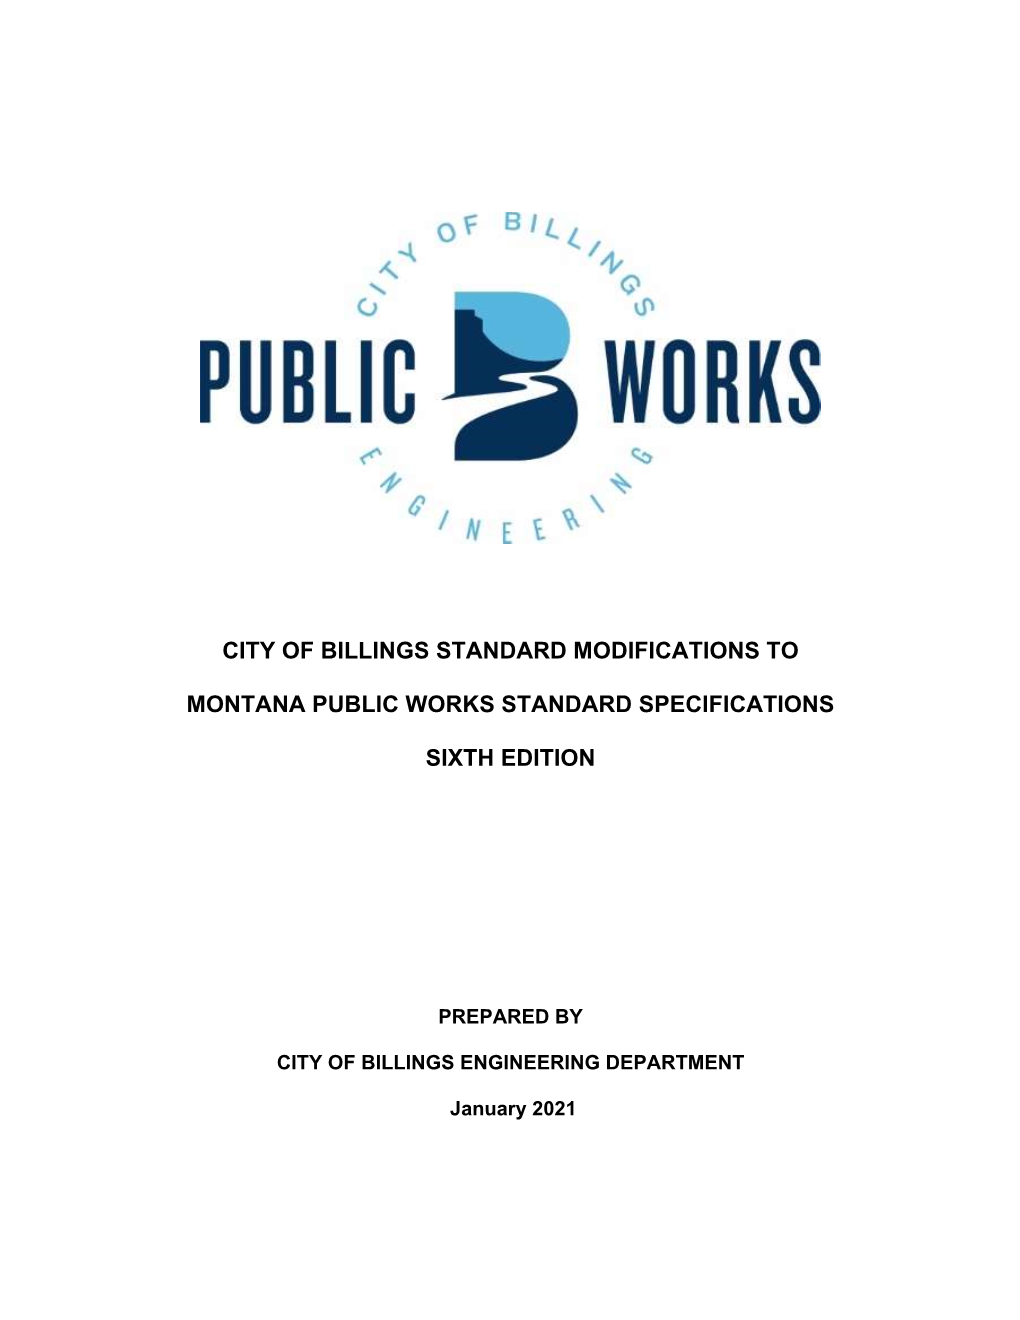 City of Billings Standard Modifications To